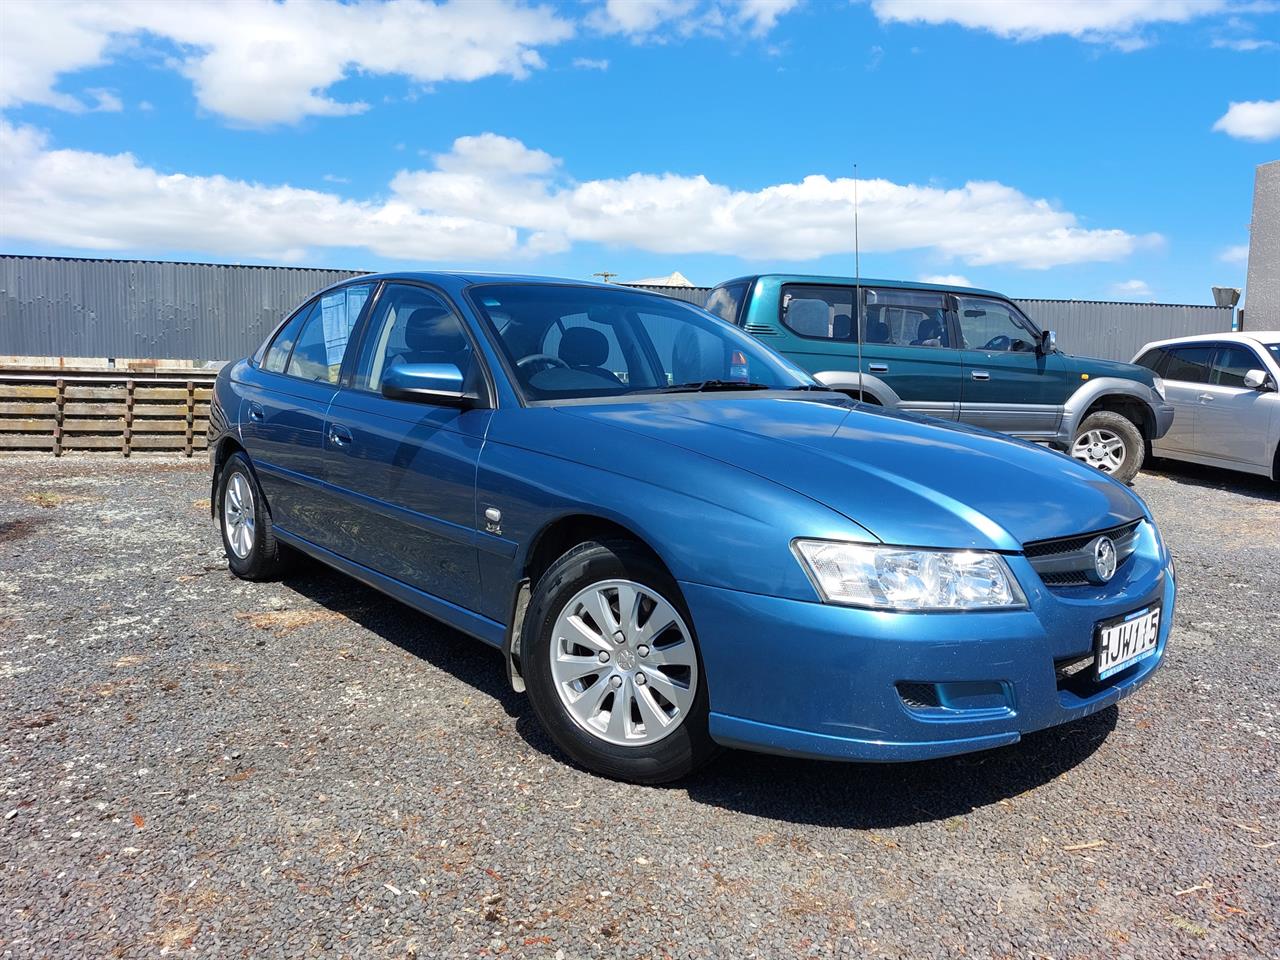 Motors Cars & Parts Cars : 2005 Holden Commodore Acclaim